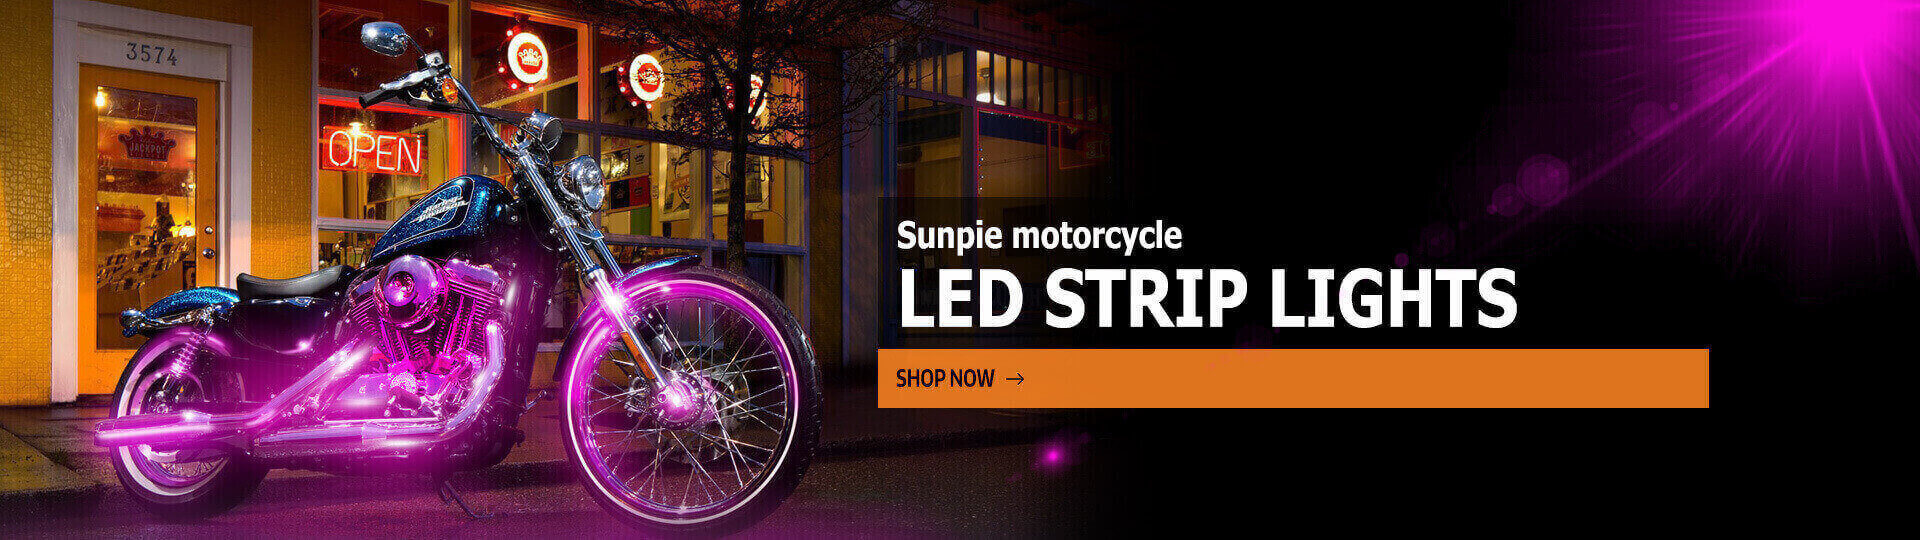 LED strip lights for motorcycles and accessories